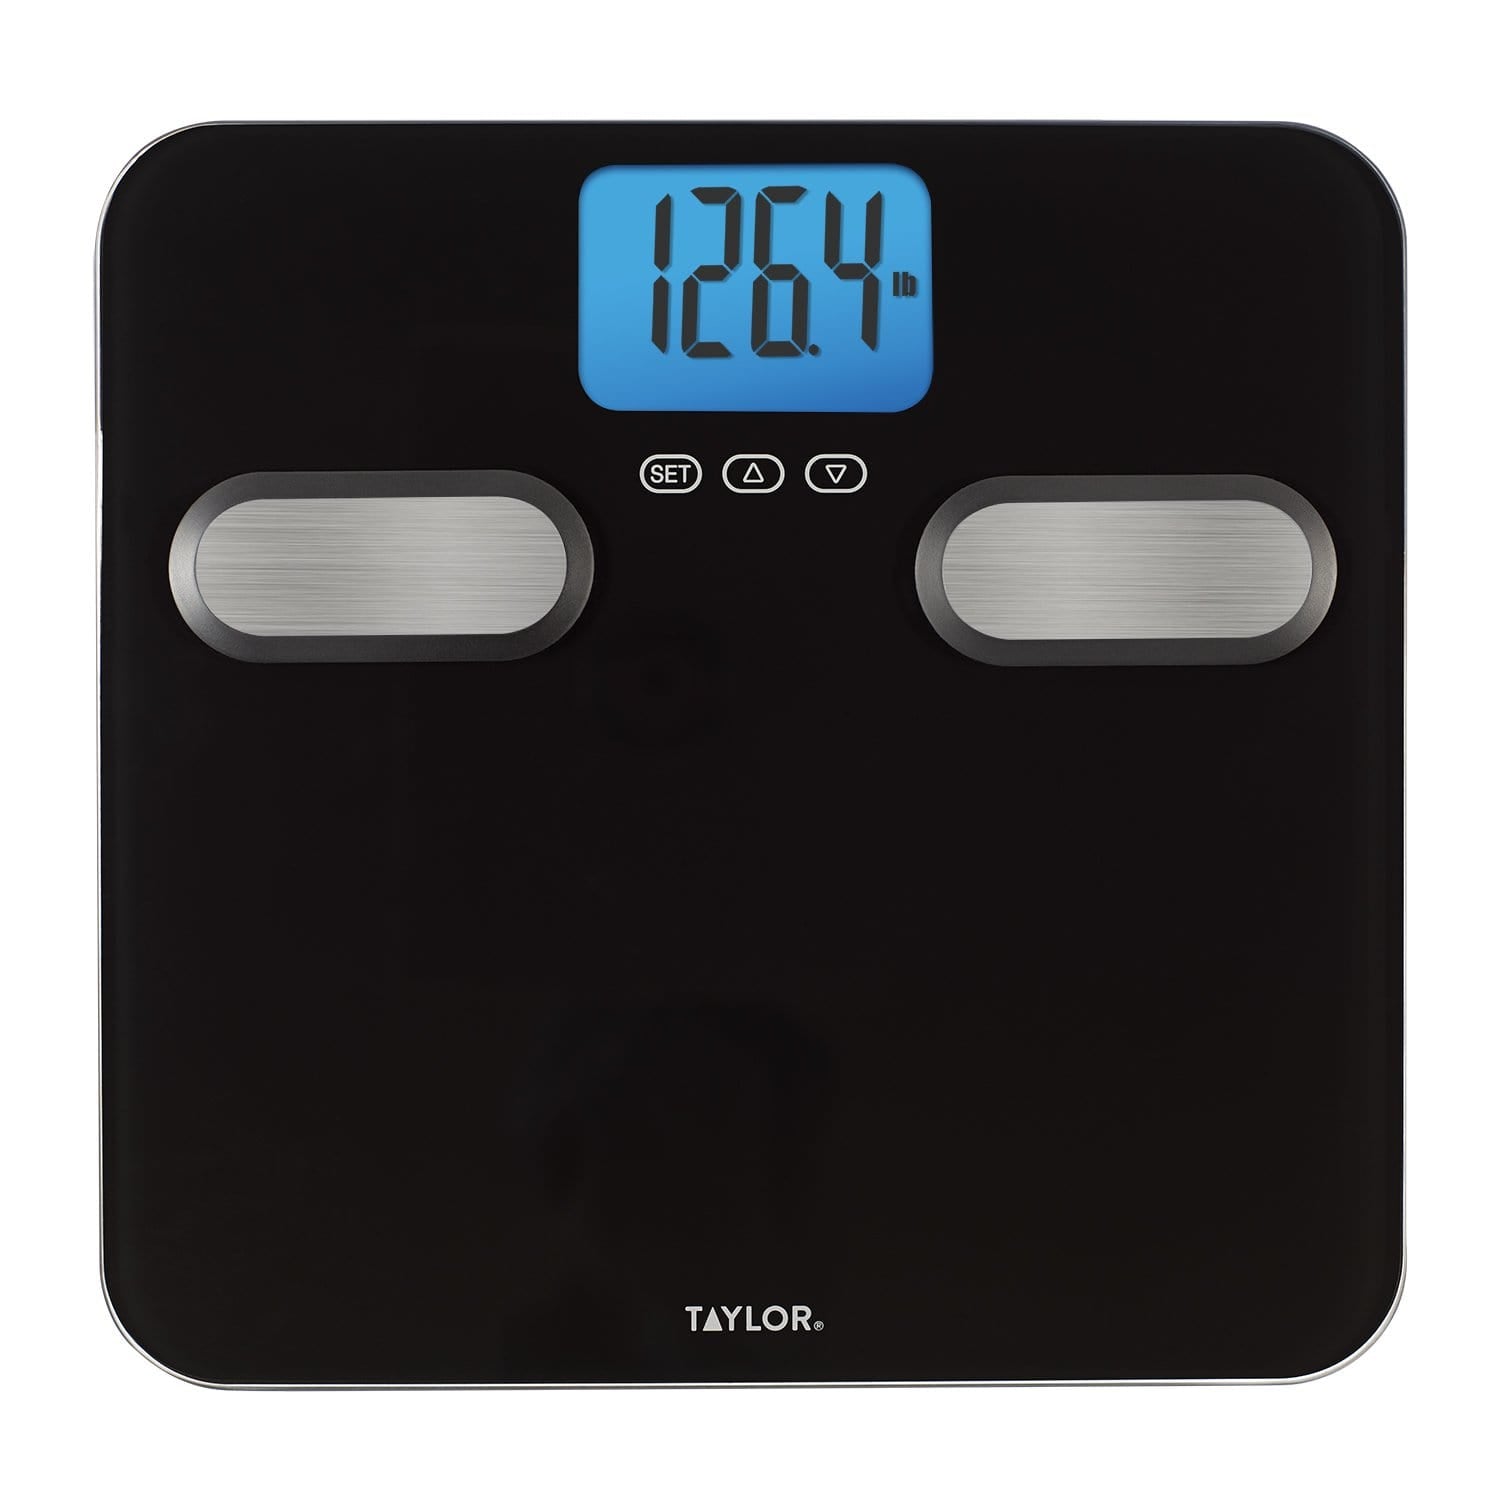 How Do Body Fat Scales Work and Are They Accurate?